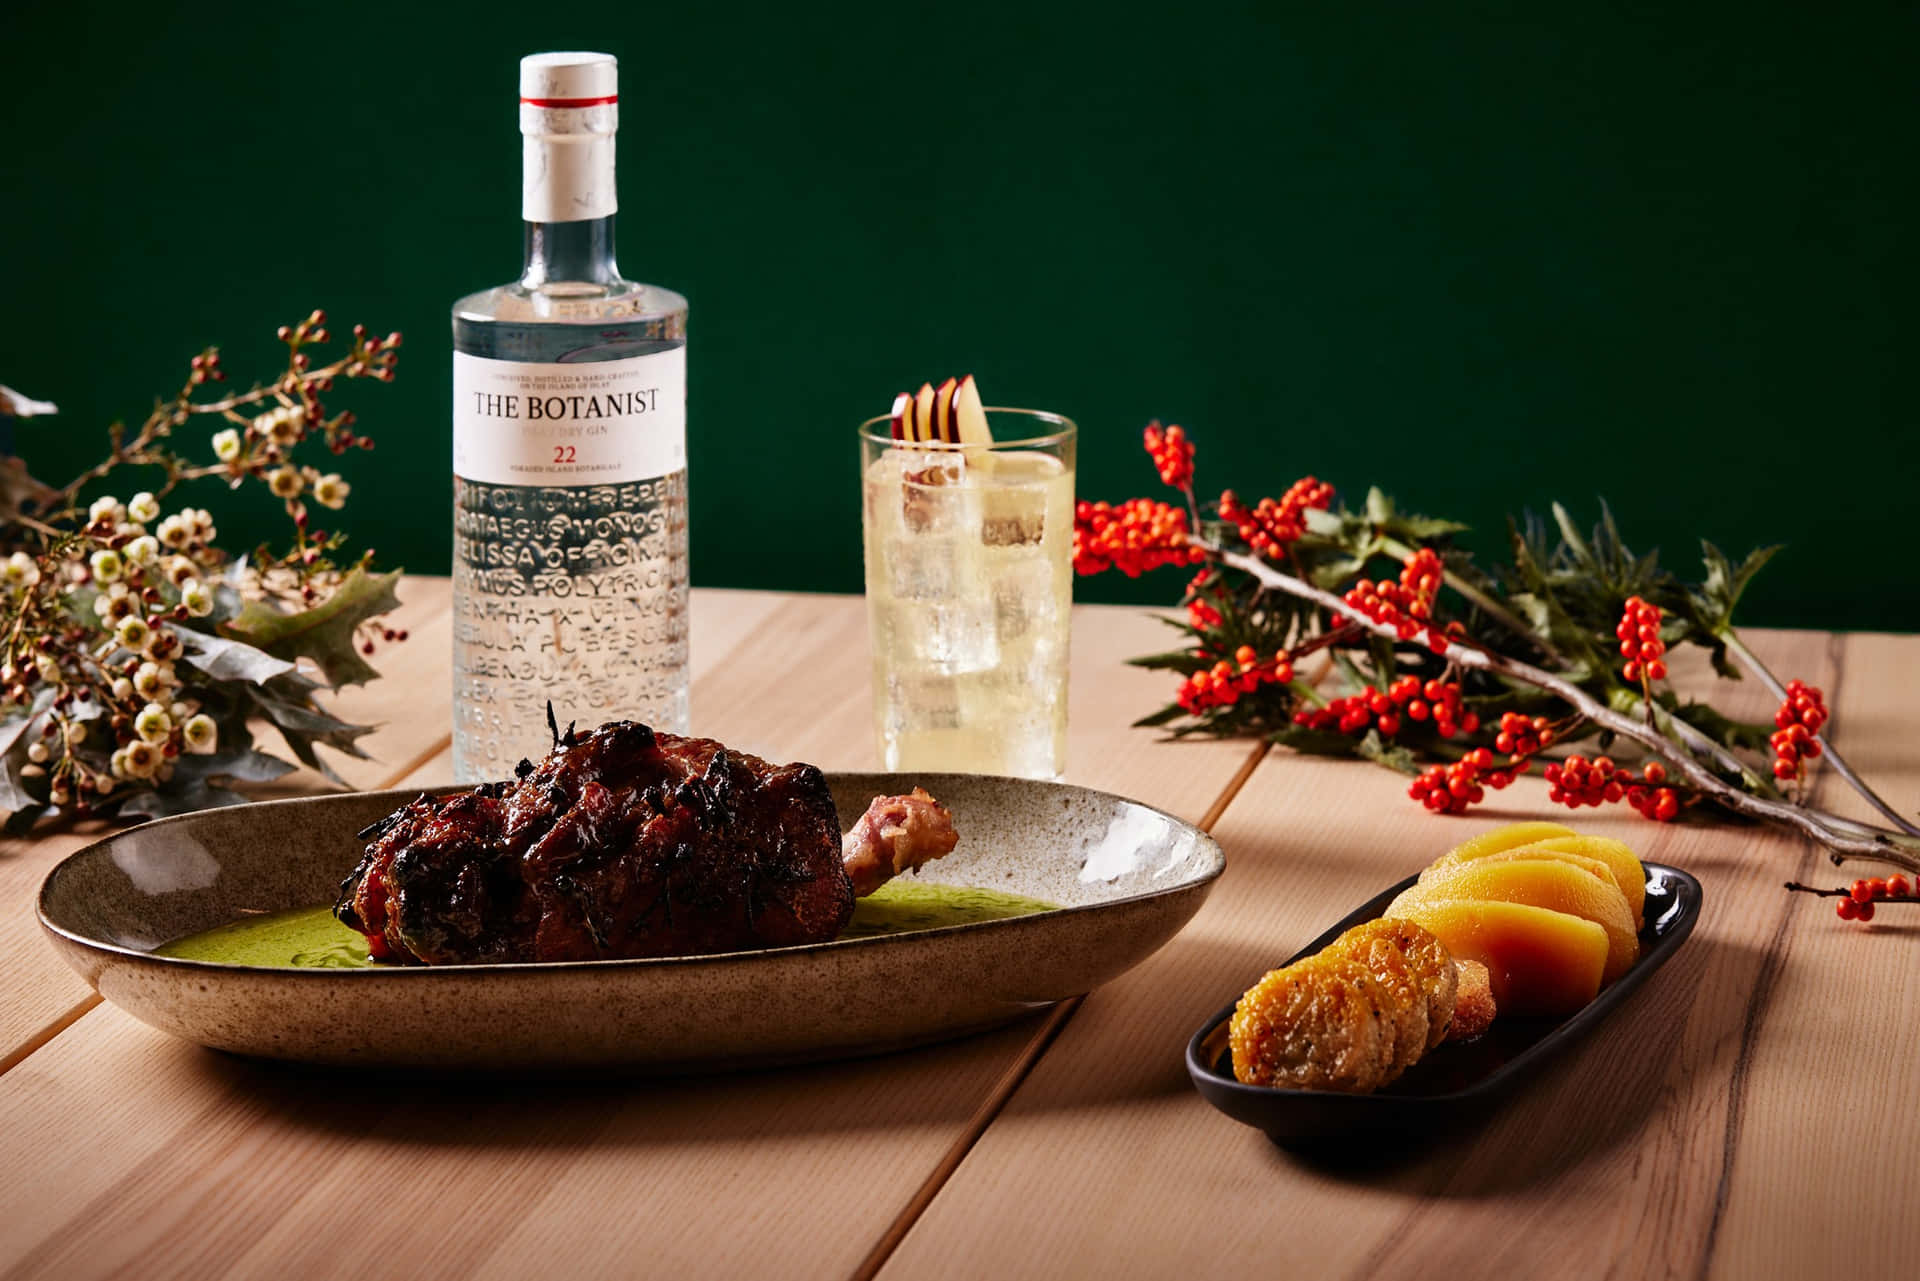 The Botanist Islay Dry Gin Drink With Steak And Potatoes Wallpaper